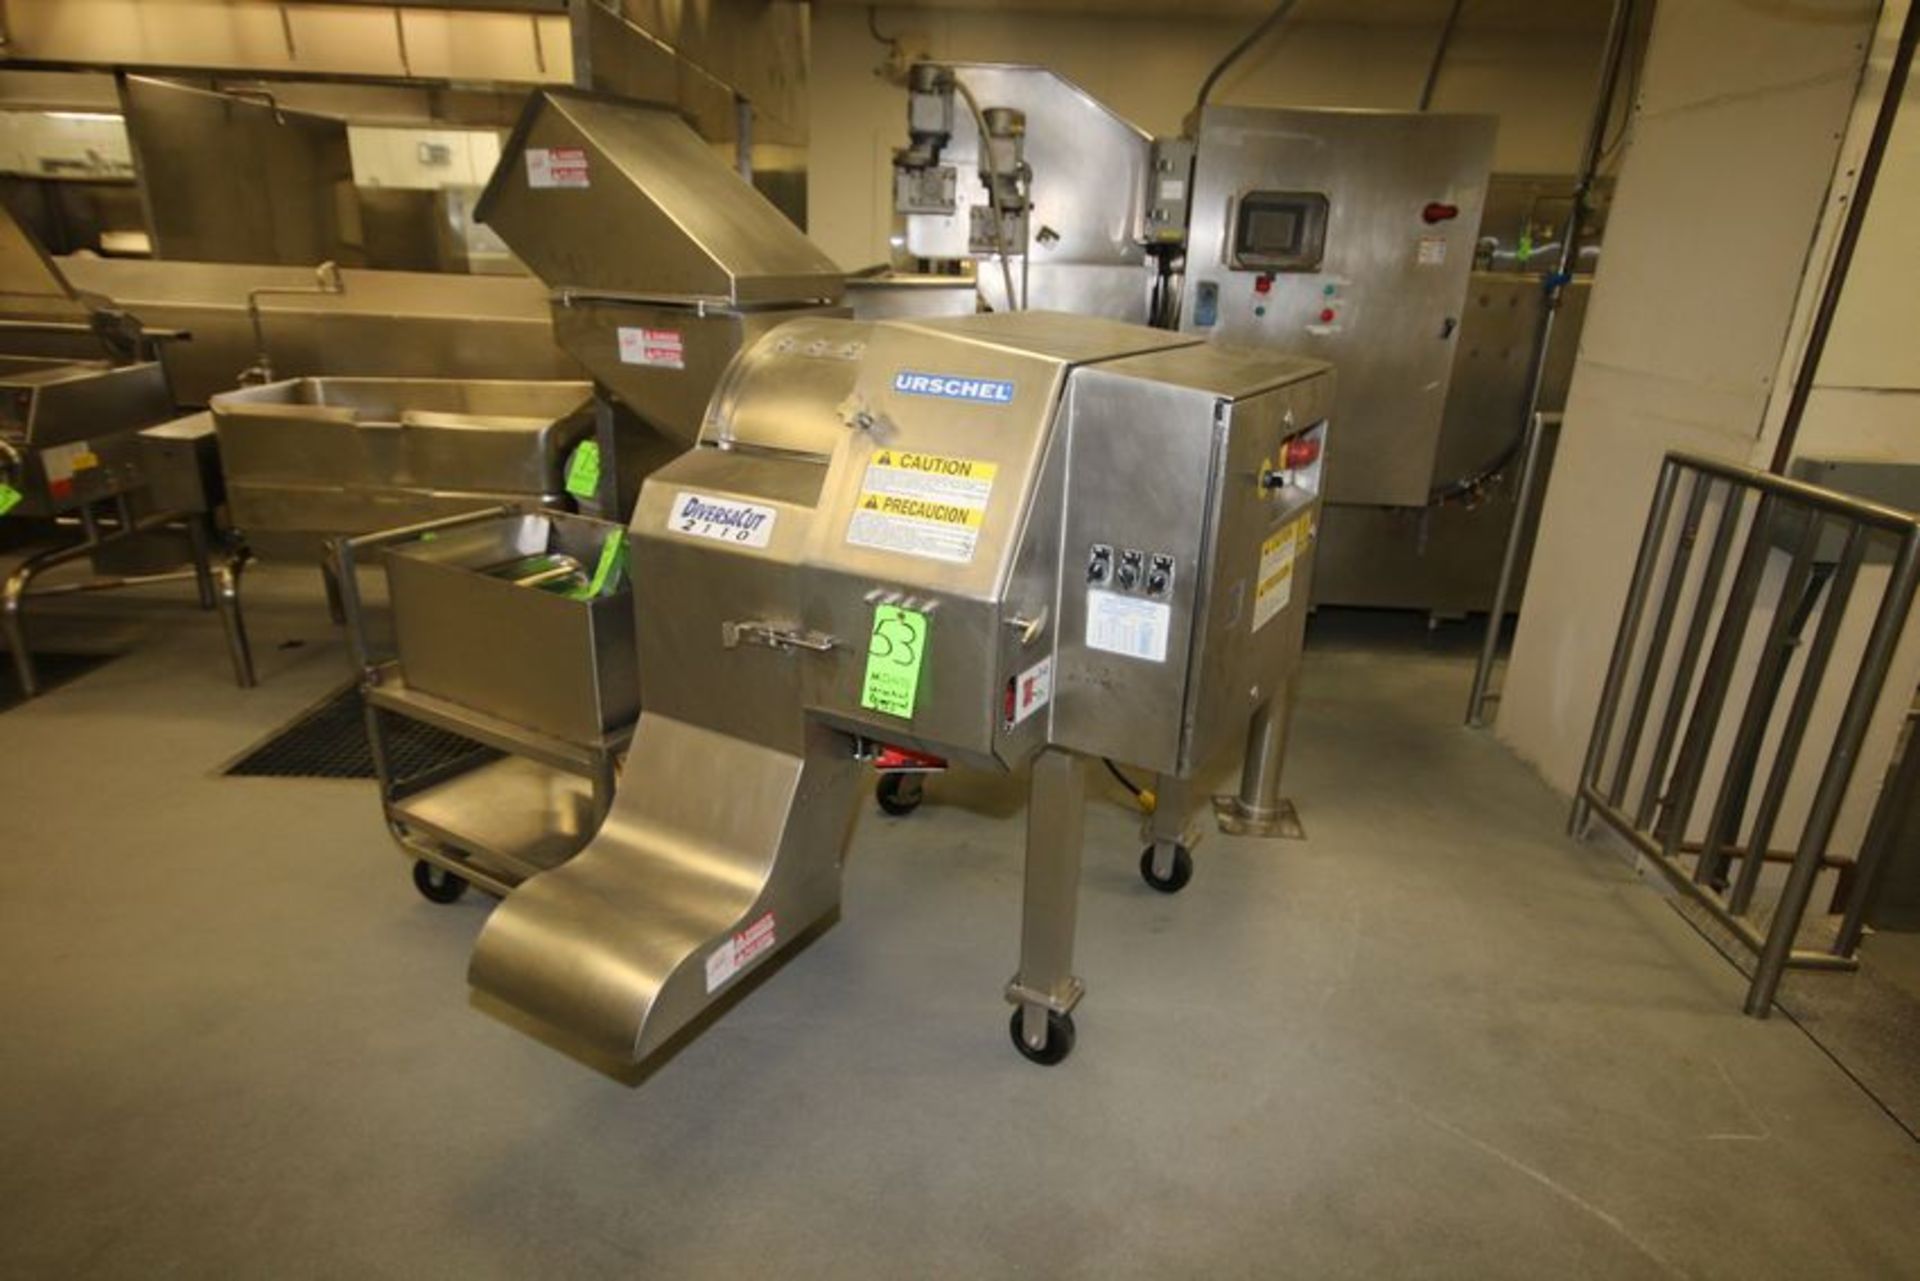 Urschel Diversa Cut 2110 Dicer, Model DC, S/N 174 with S/S Clad Motor, Controls, Mounted on S/S